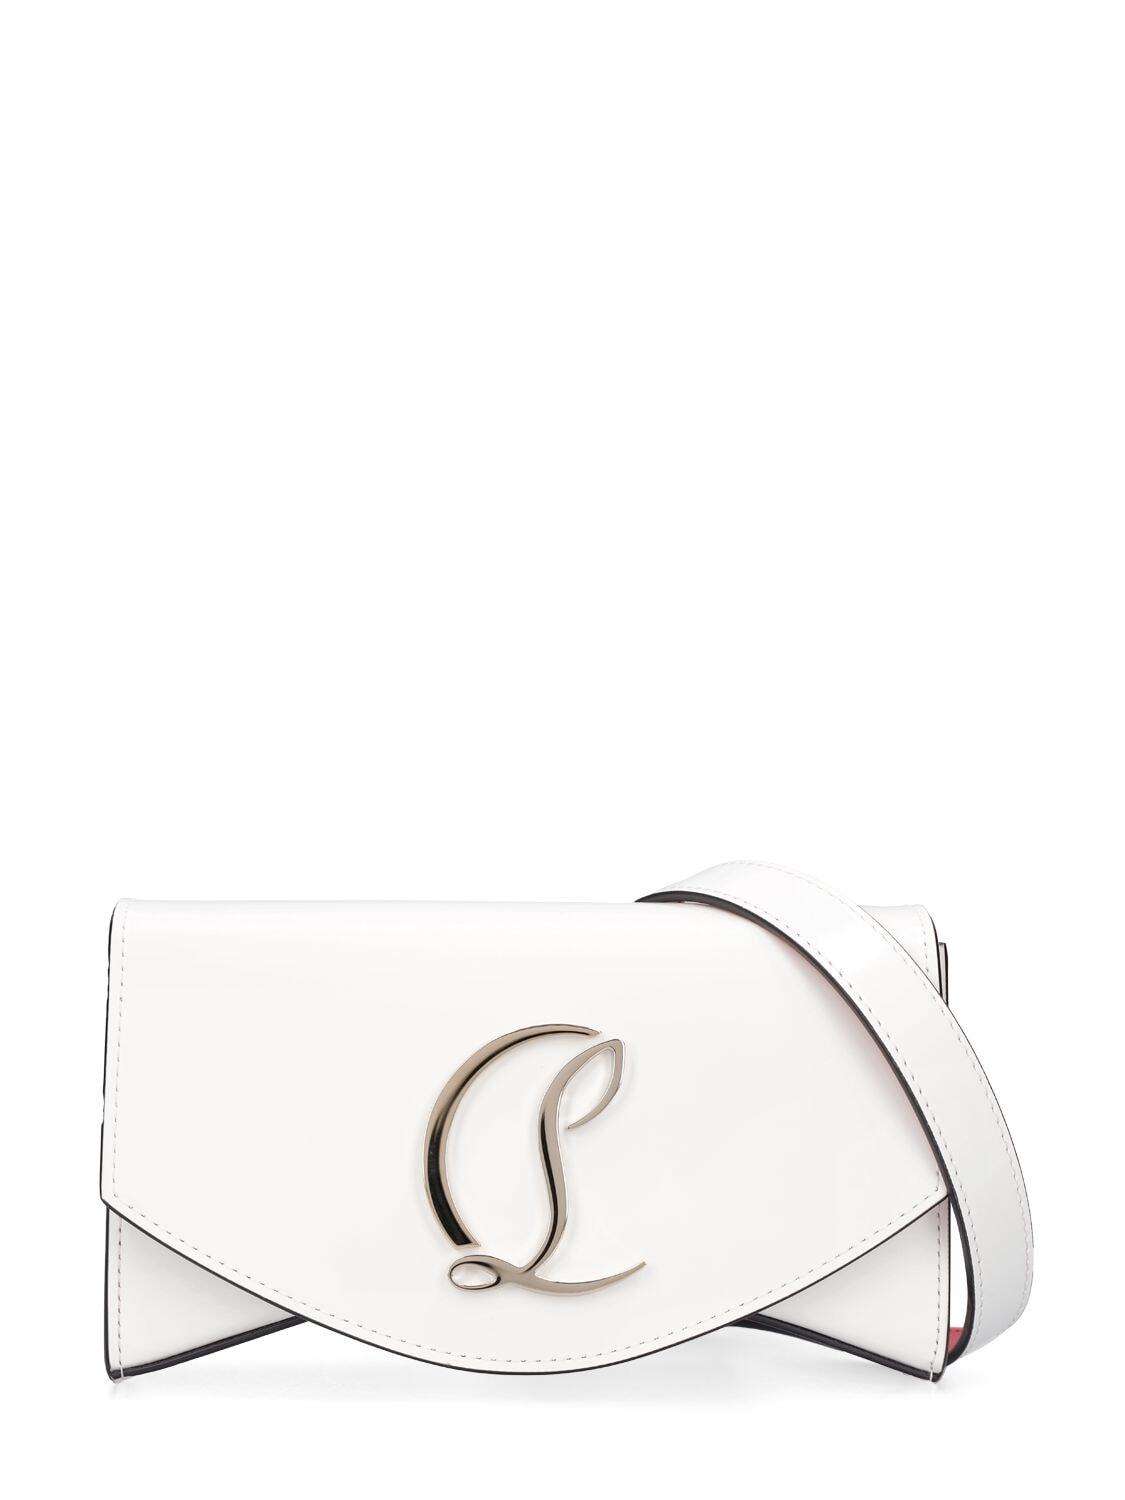 CHRISTIAN LOUBOUTIN Small Loubi54 Leather Shoulder Bag in gold / white